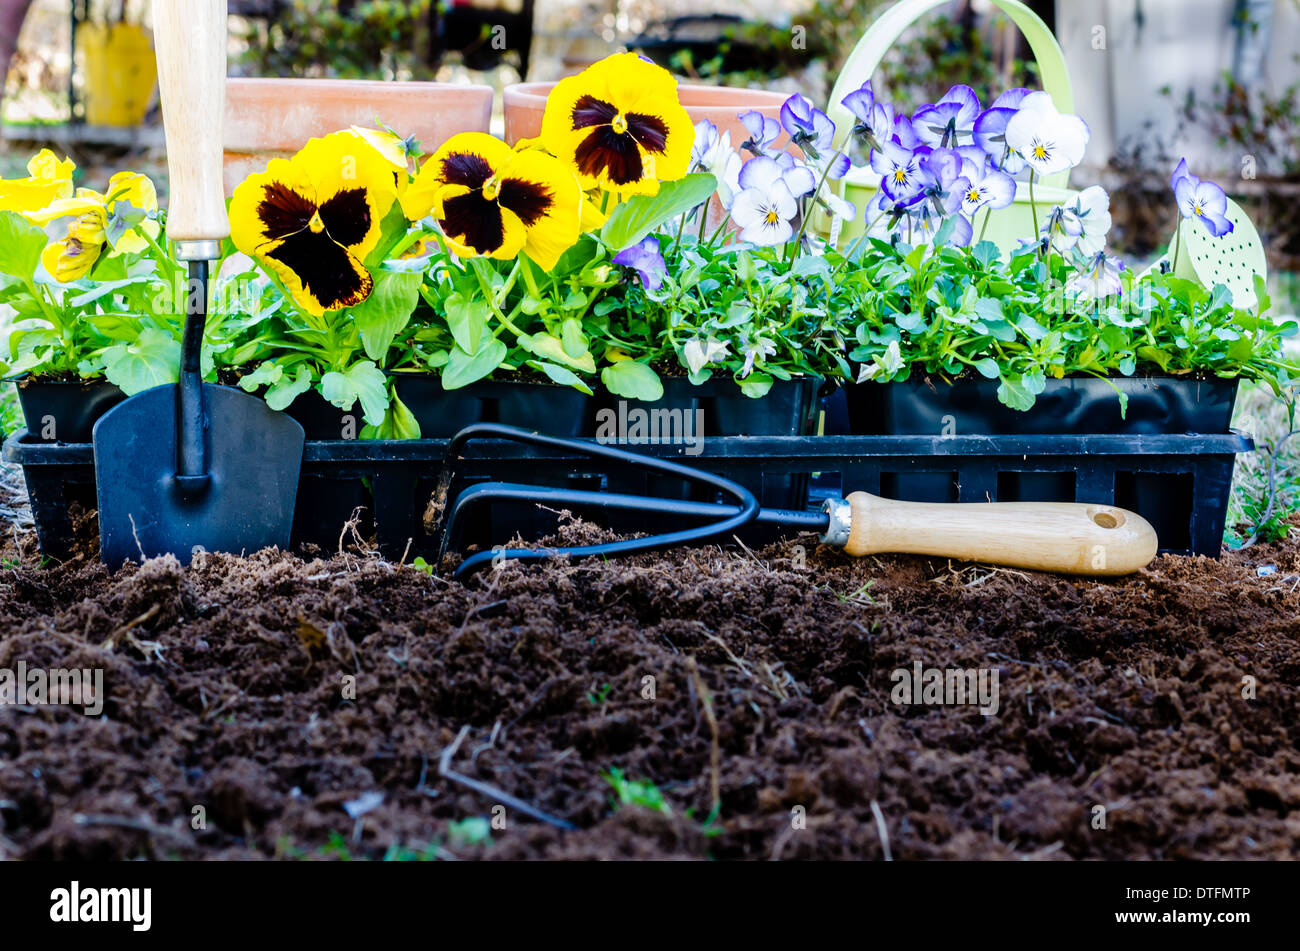 Spring gardening. Pots of pansies and violas with trowel, cultivator, and watering can on cultivated soil. Stock Photo